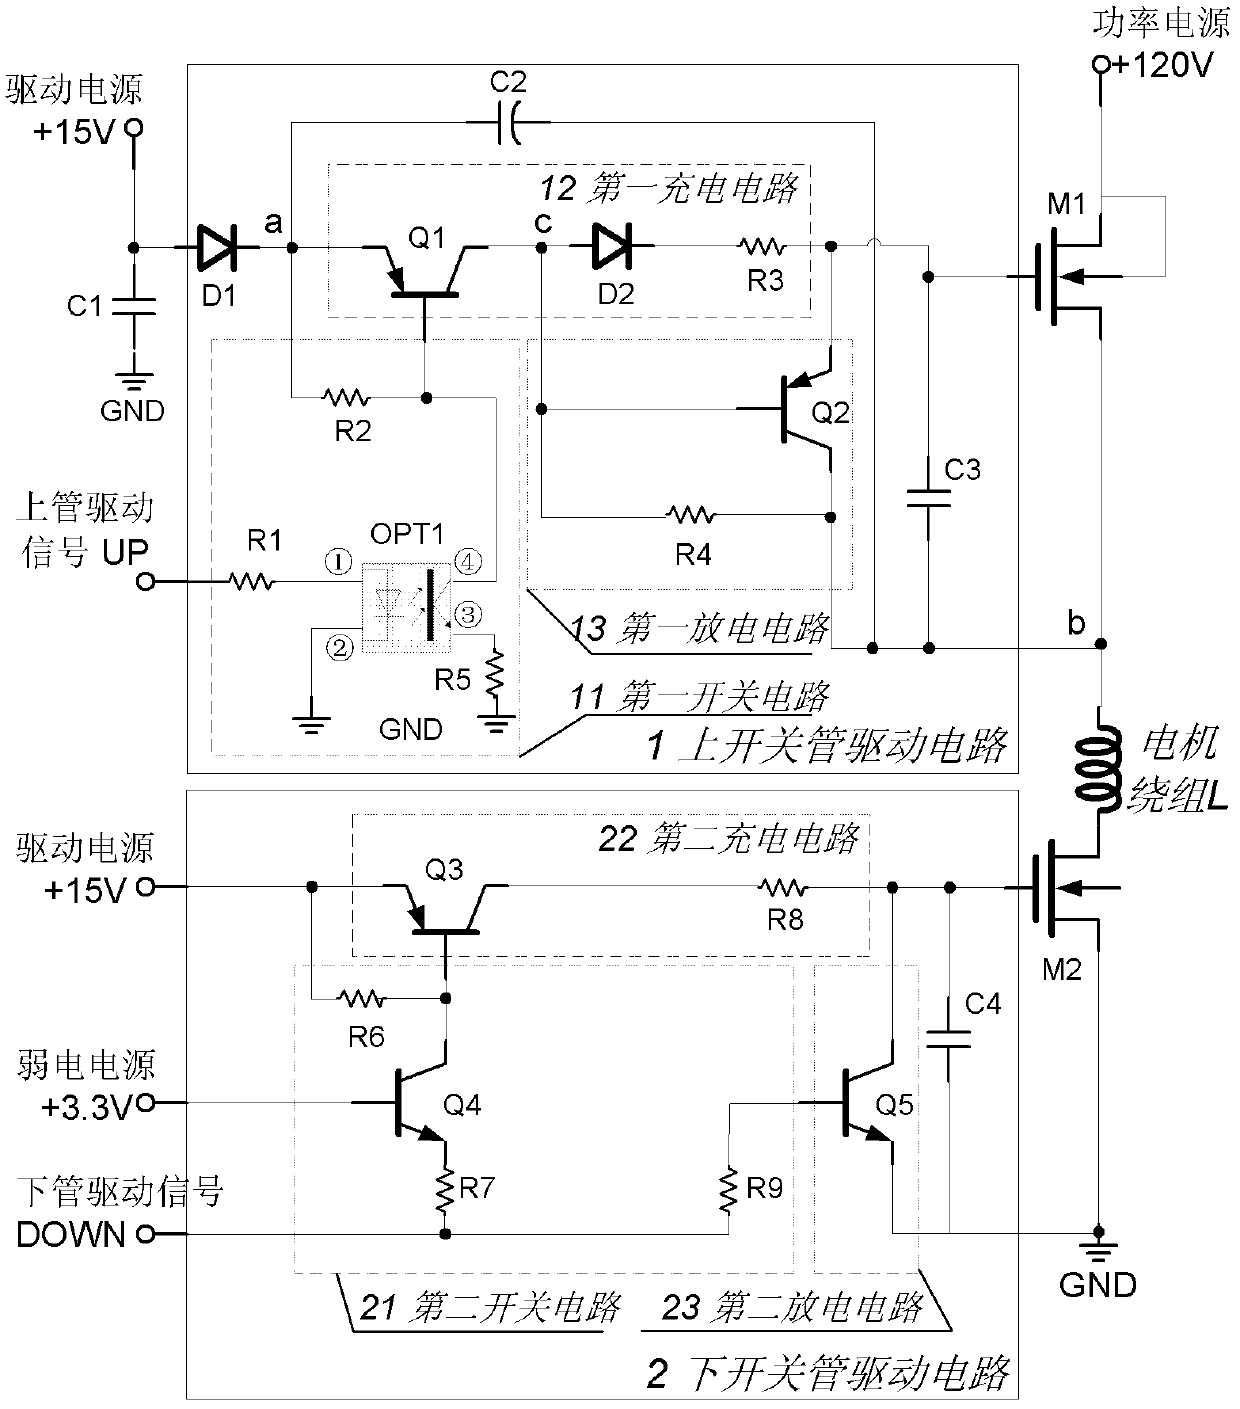 Switched reluctance motor bootstrapping driving circuit with low cost and high isolation characteristic